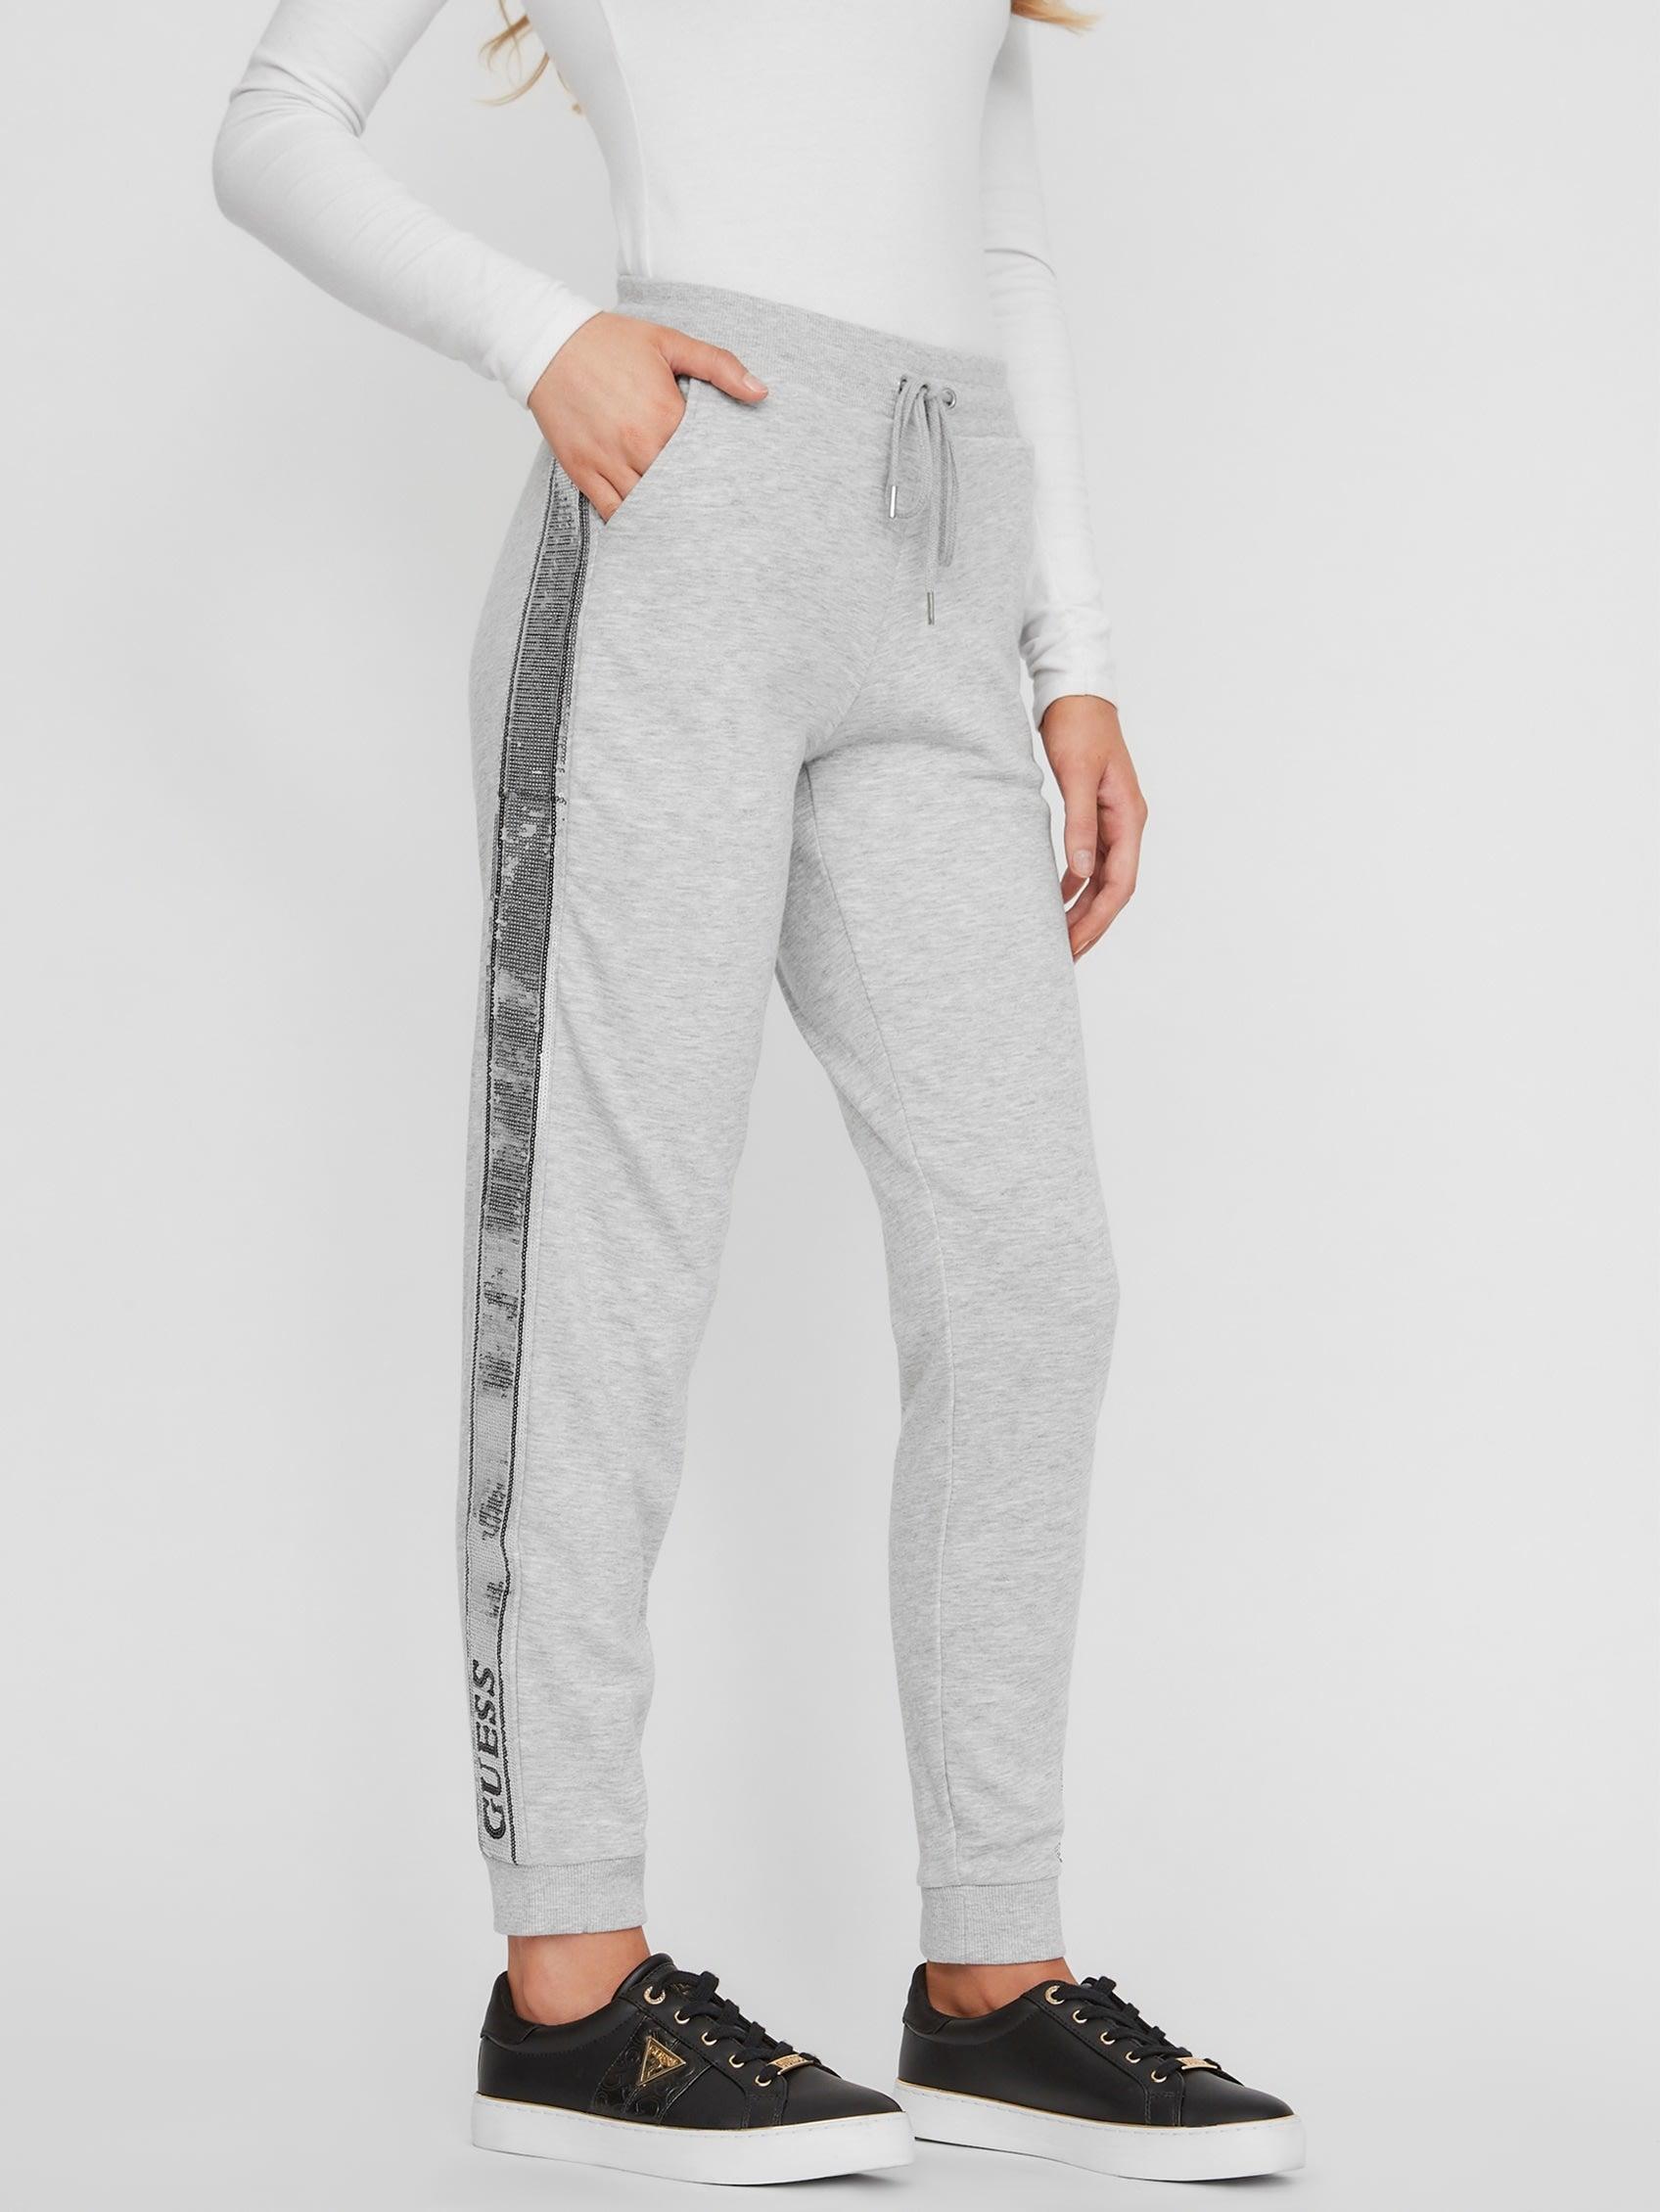 Guess Factory Maila Sequin Logo Joggers in Gray | Lyst